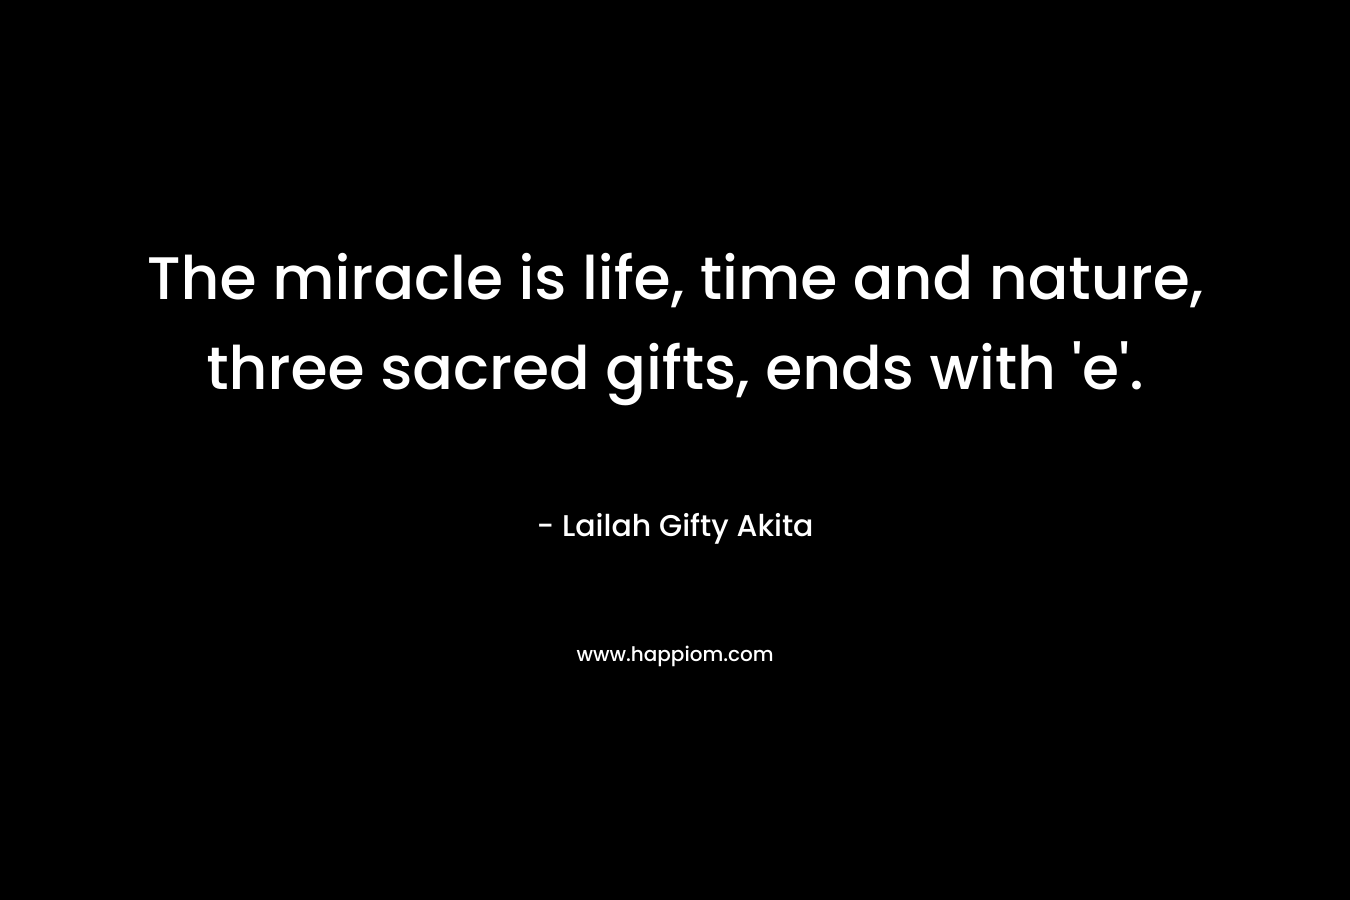 The miracle is life, time and nature, three sacred gifts, ends with 'e'.